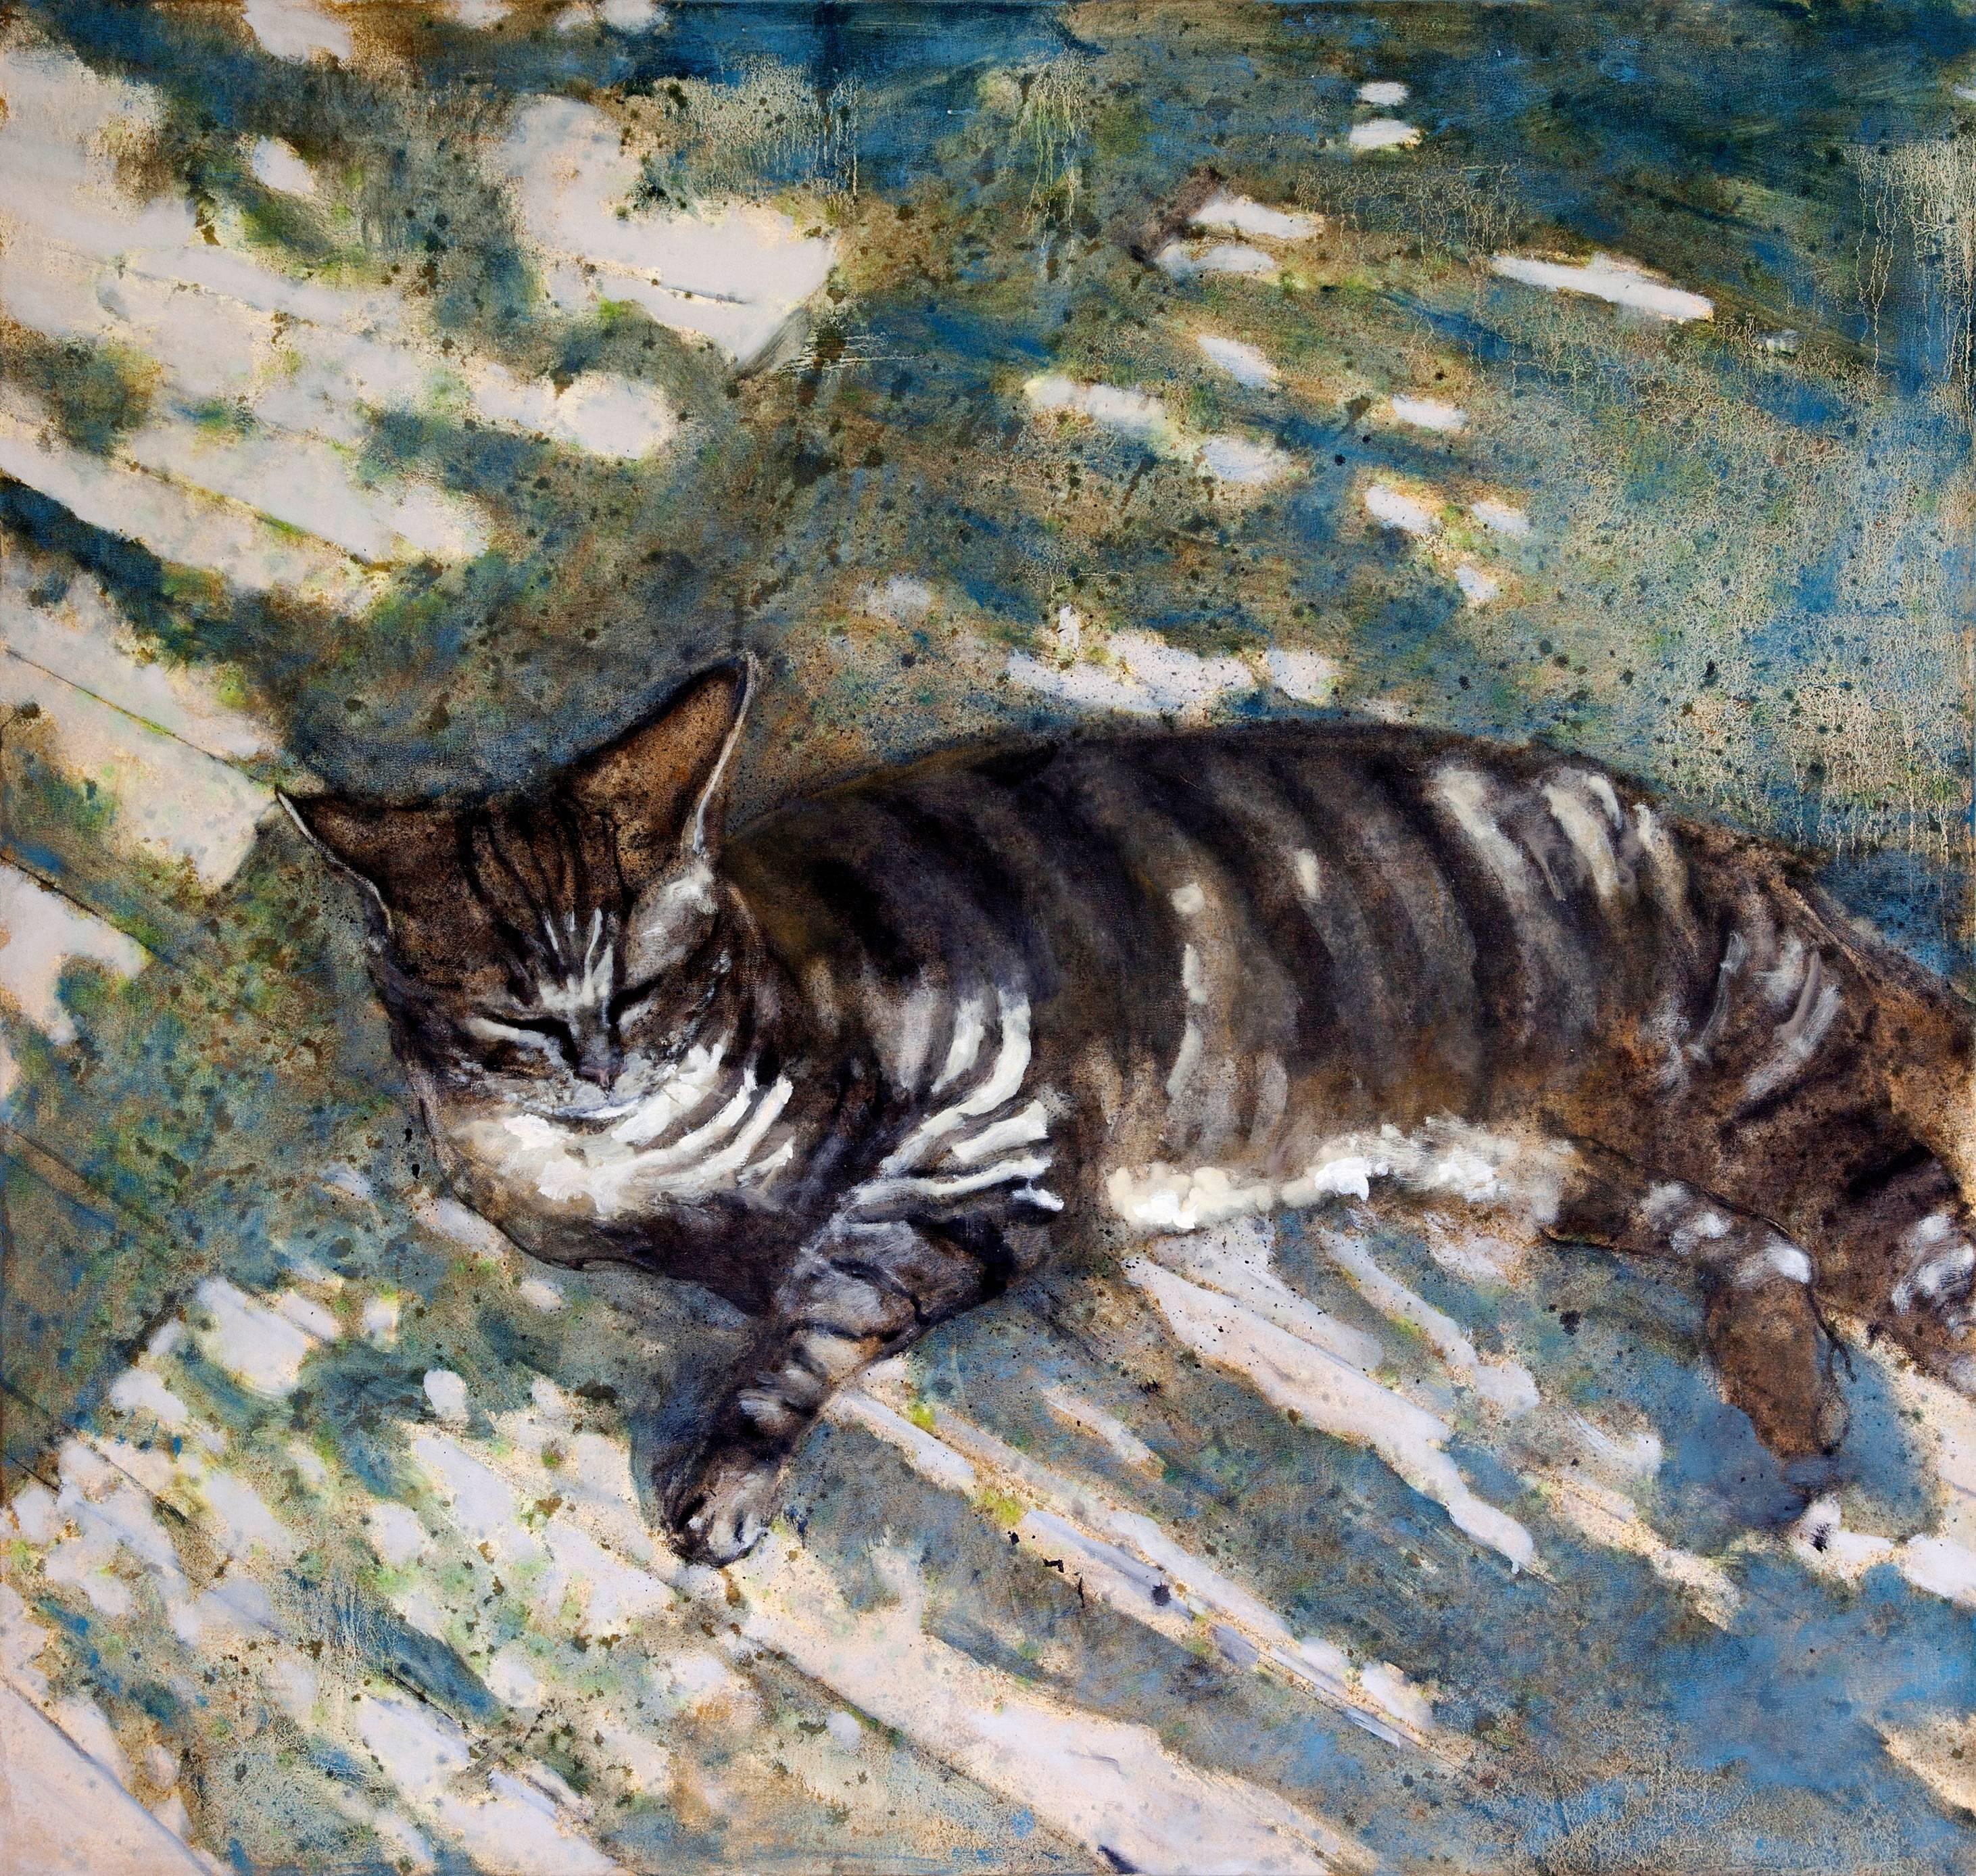 Night Season (Impressionistic Oil Painting of Tiger Striped Cat on a Porch)